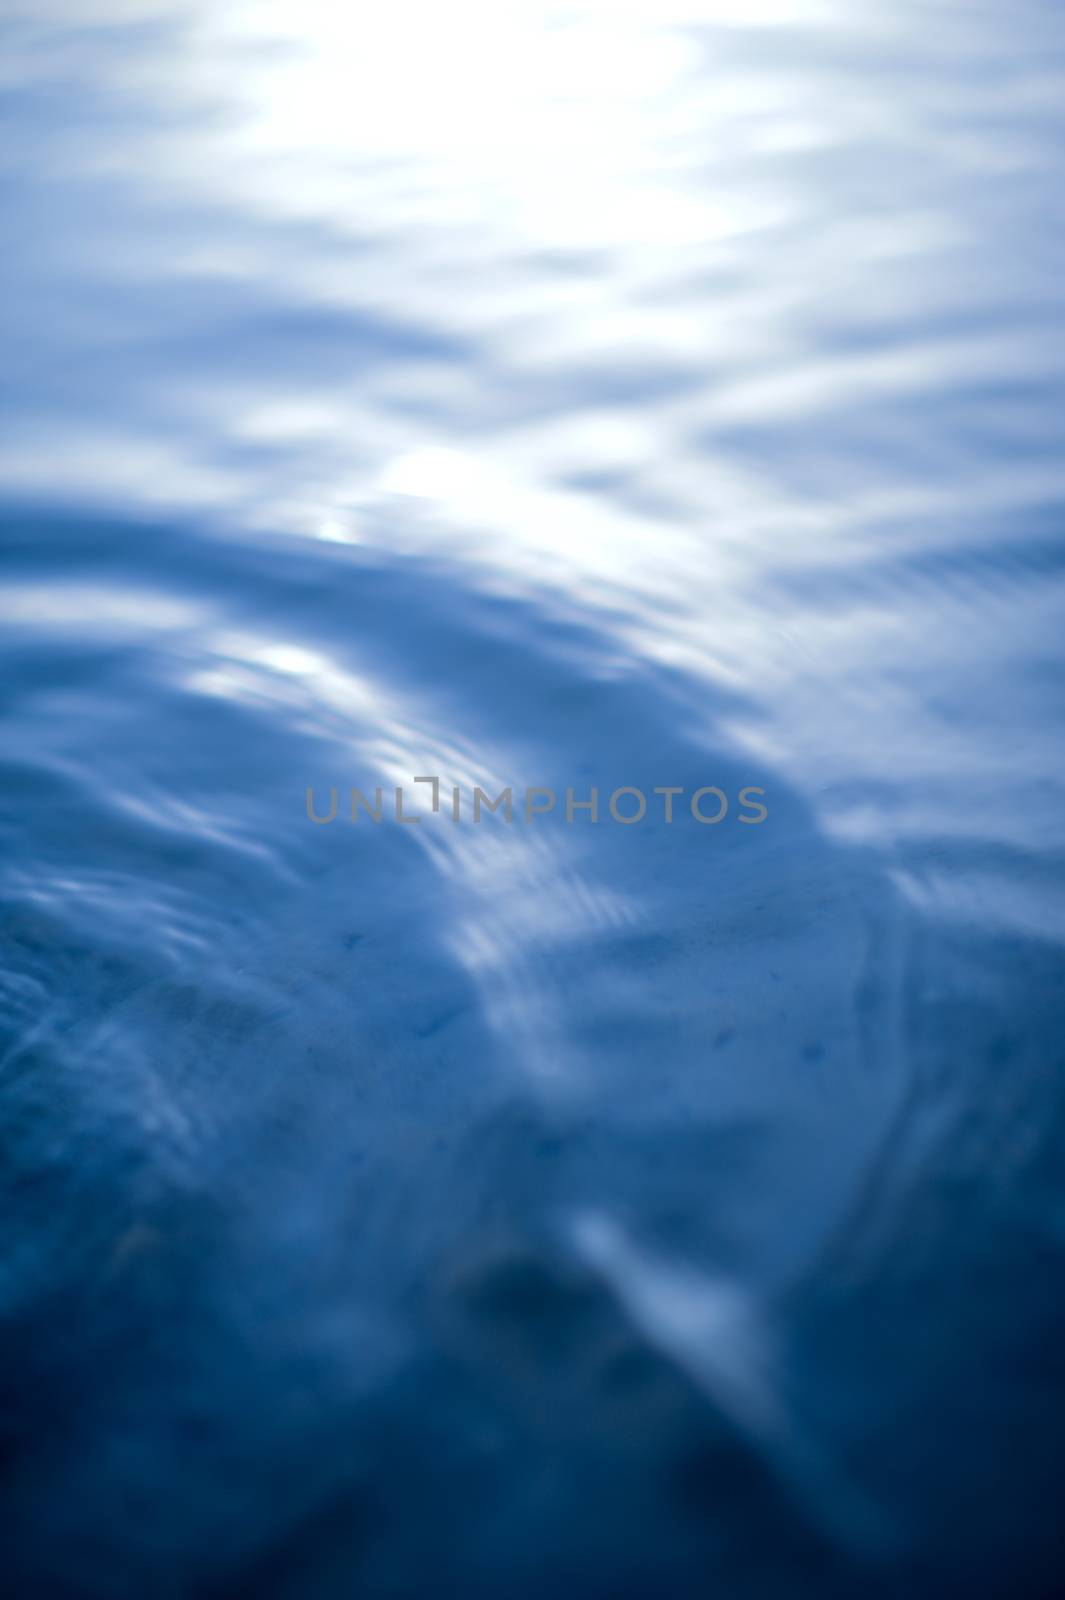 Water Background. Calm Lake Waters in the Sun - Nature Background. Vertical Photography.